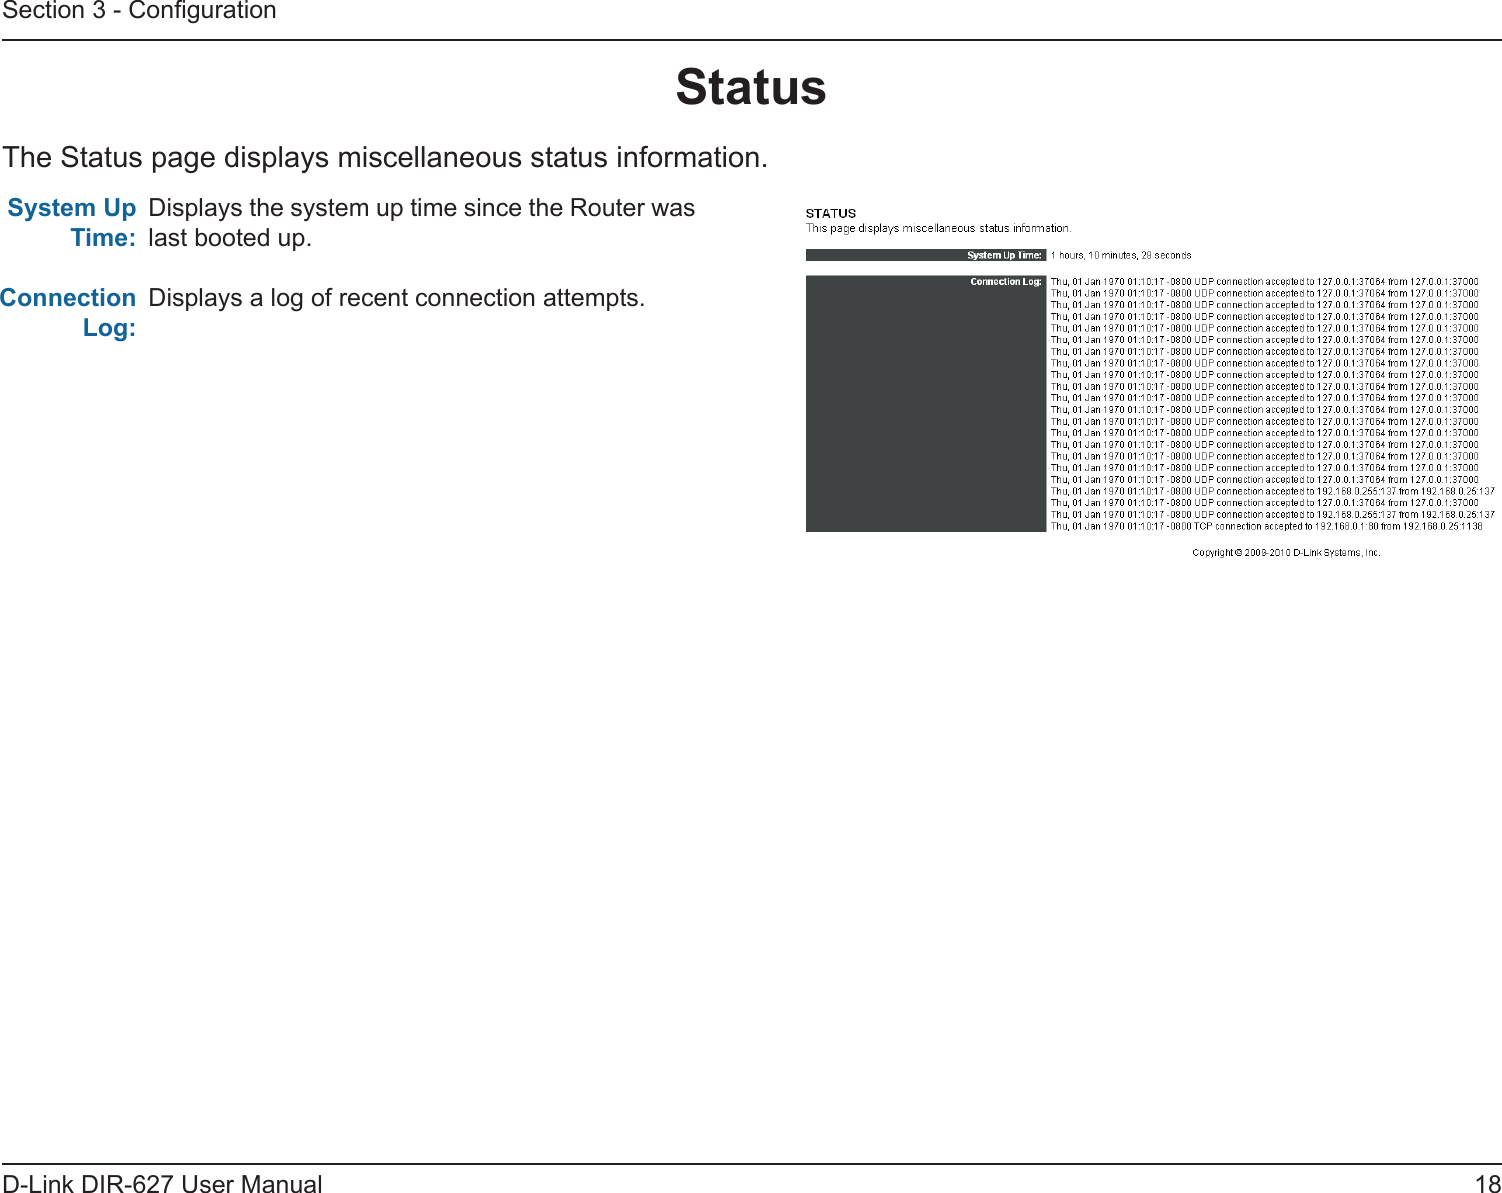 18D-Link DIR-627 User ManualSection 3 - CongurationStatus The Status page displays miscellaneous status information.Displays the system up time since the Router was last booted up.Displays a log of recent connection attempts.SystemUpTime:Connection Log: